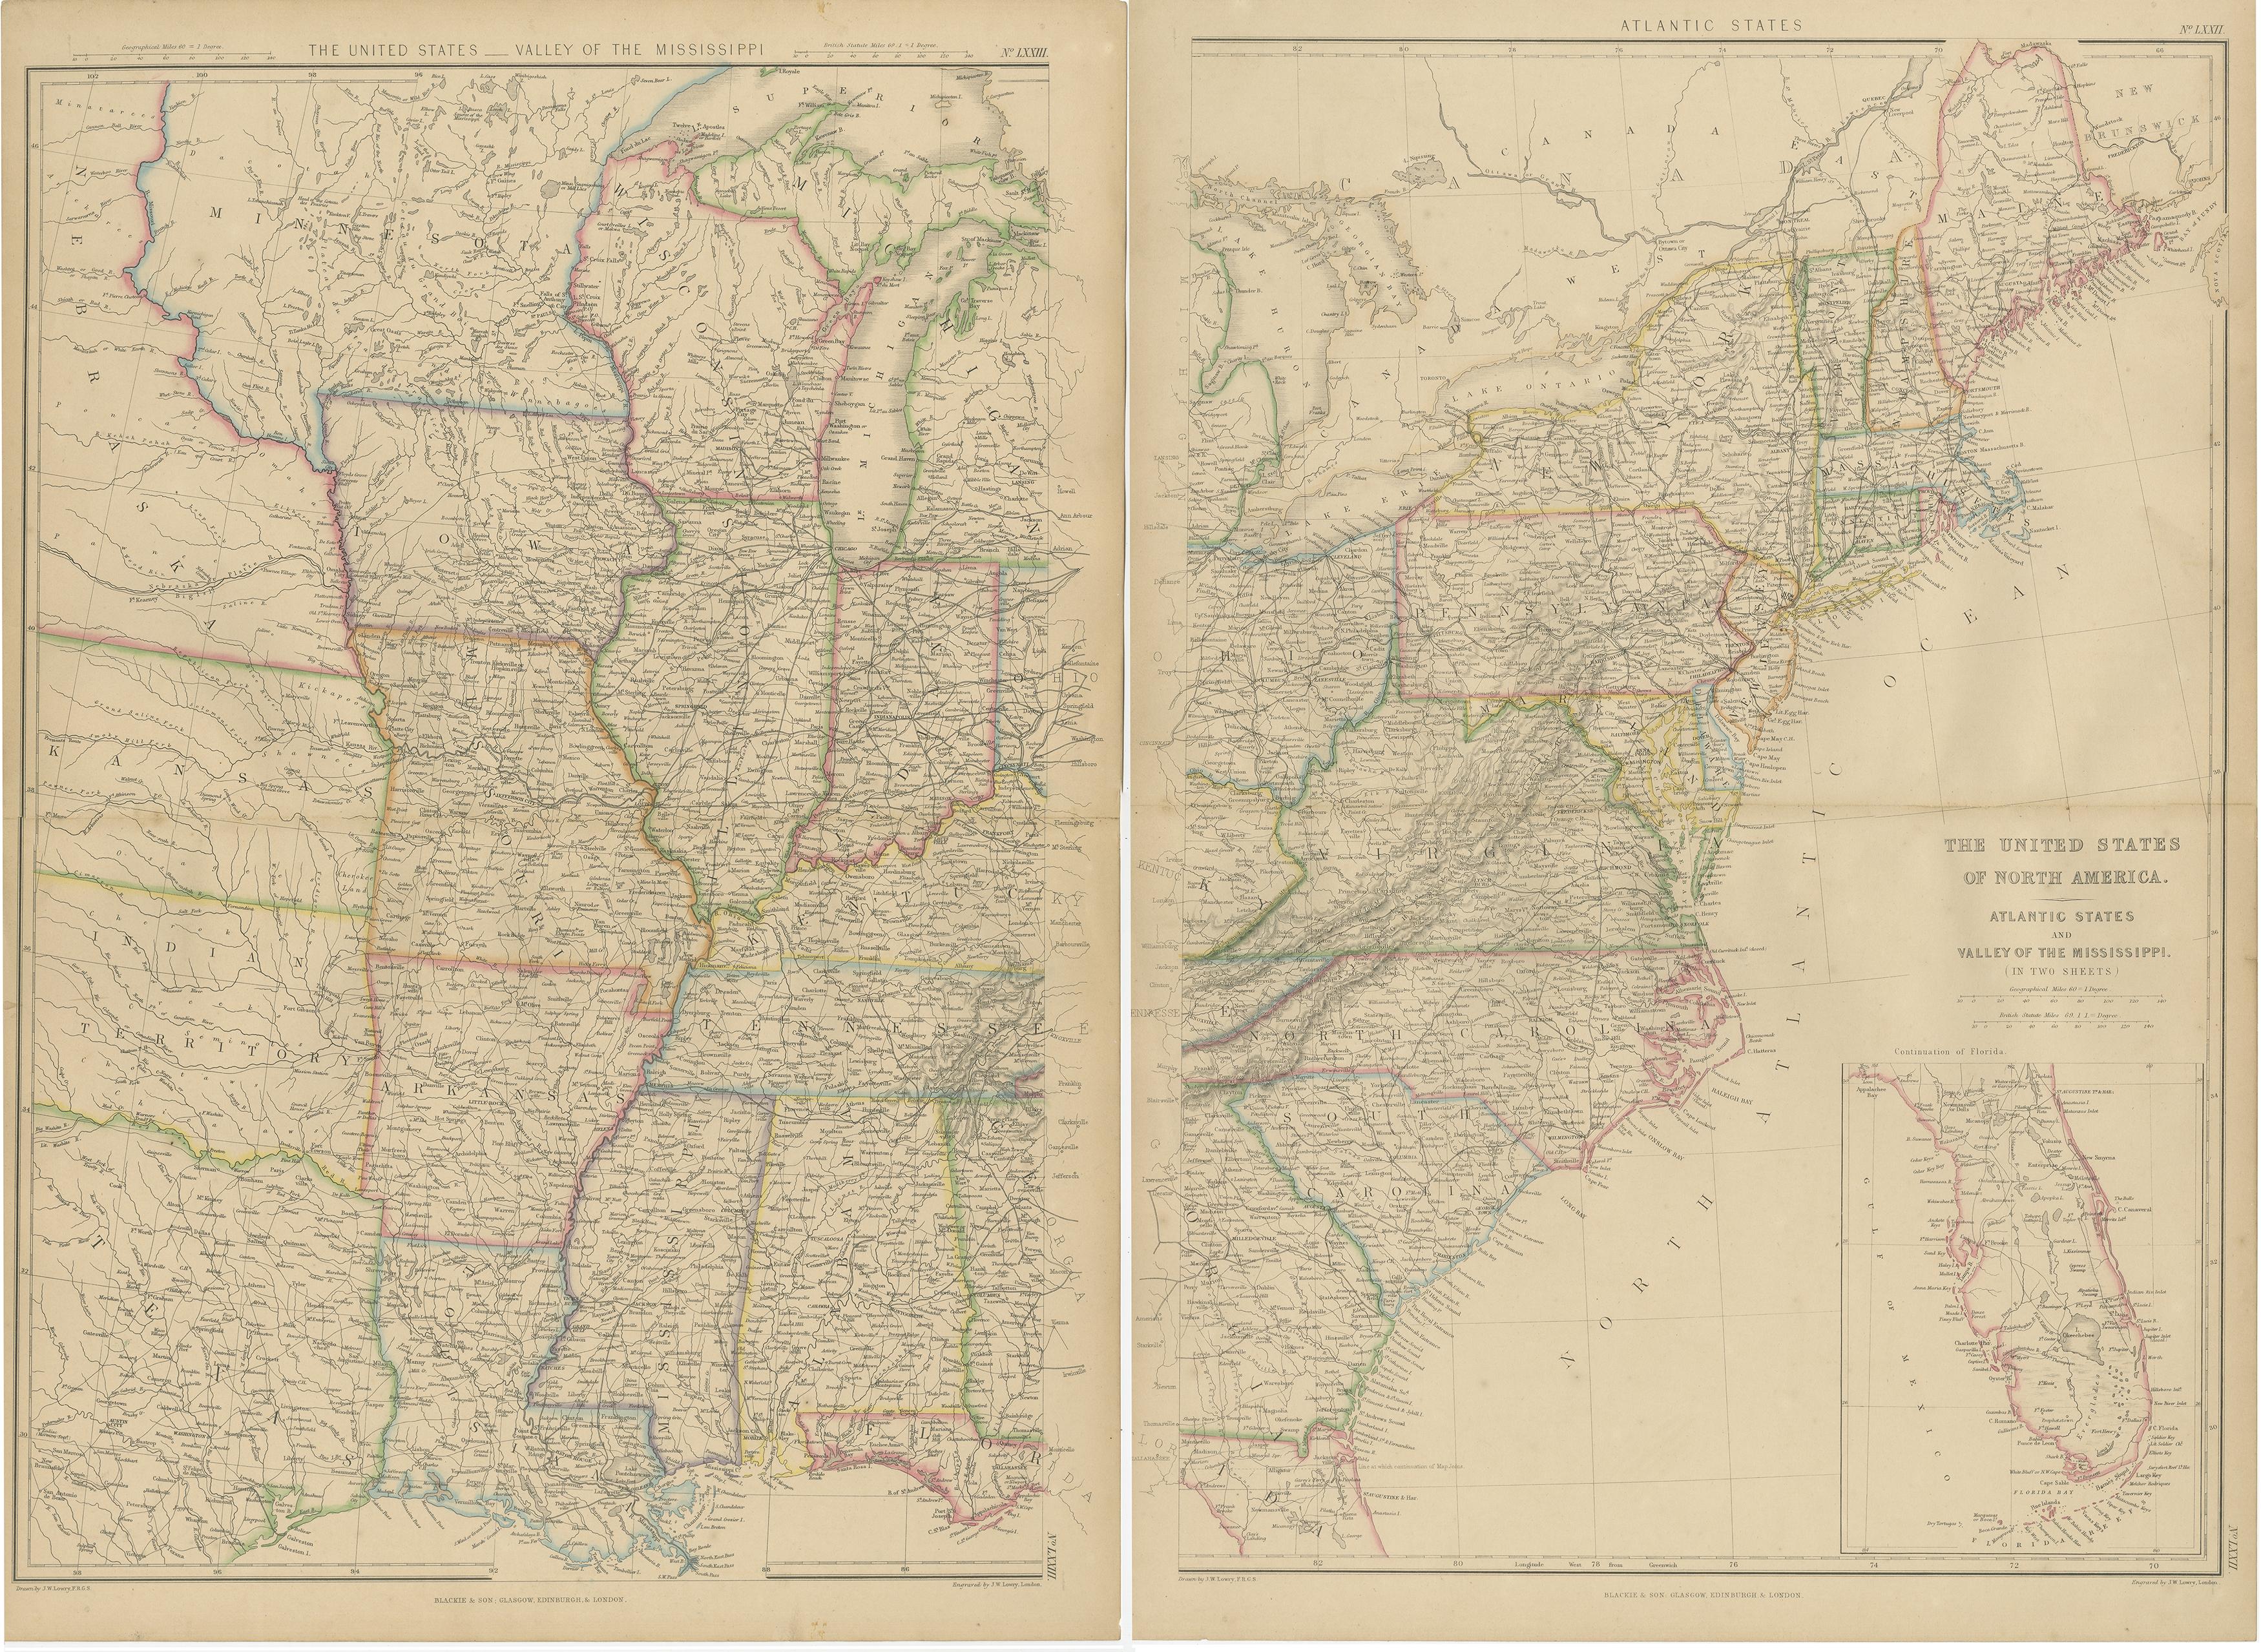 Paper Set of 2 Antique Maps of the United States by W. G. Blackie, 1859 For Sale